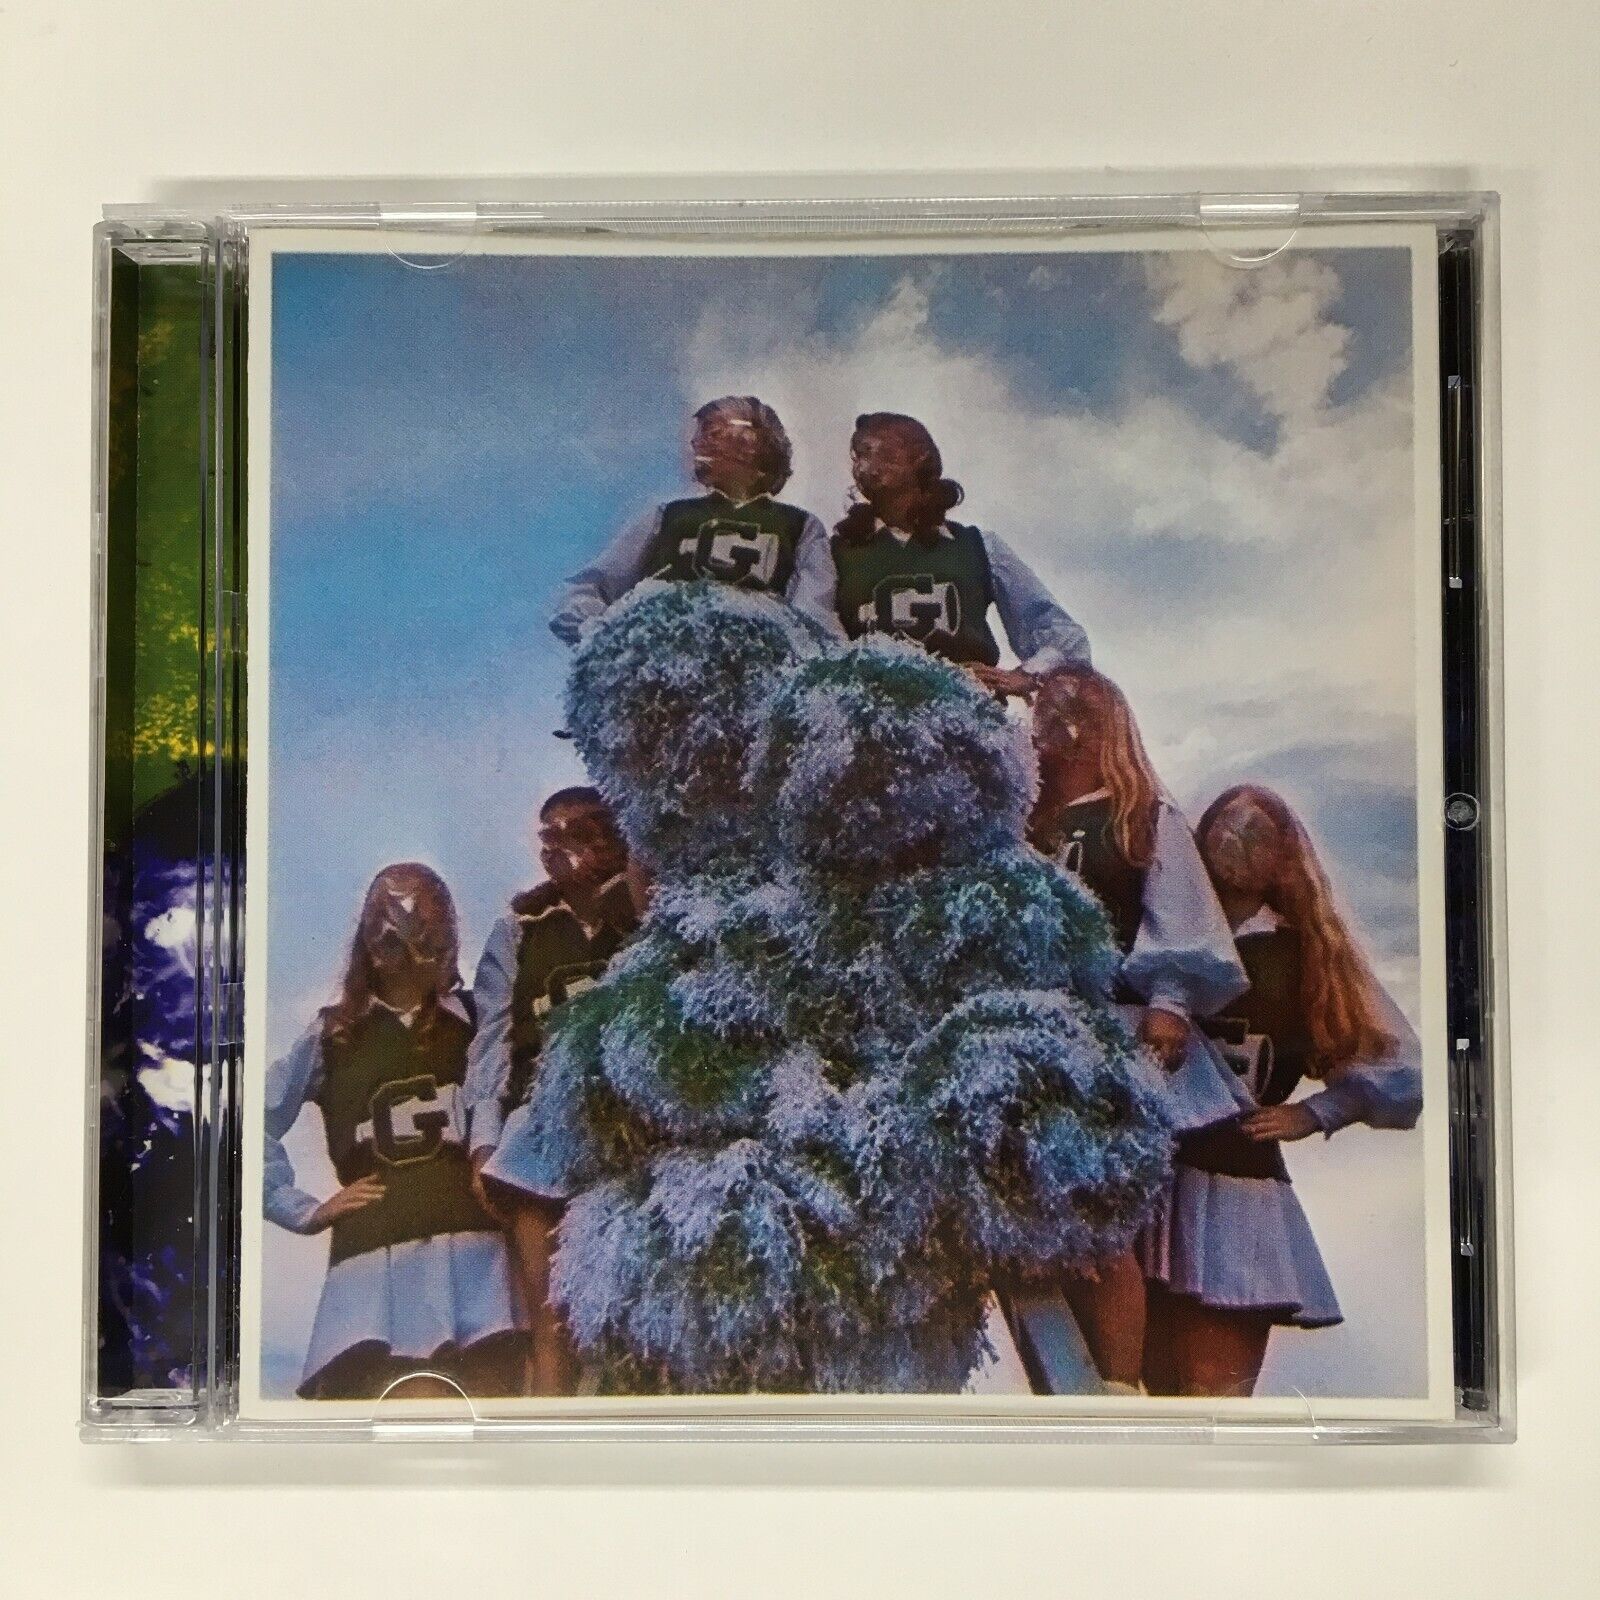 Treats by Sleigh Bells (CD, 2010, Mom and Pop Music)